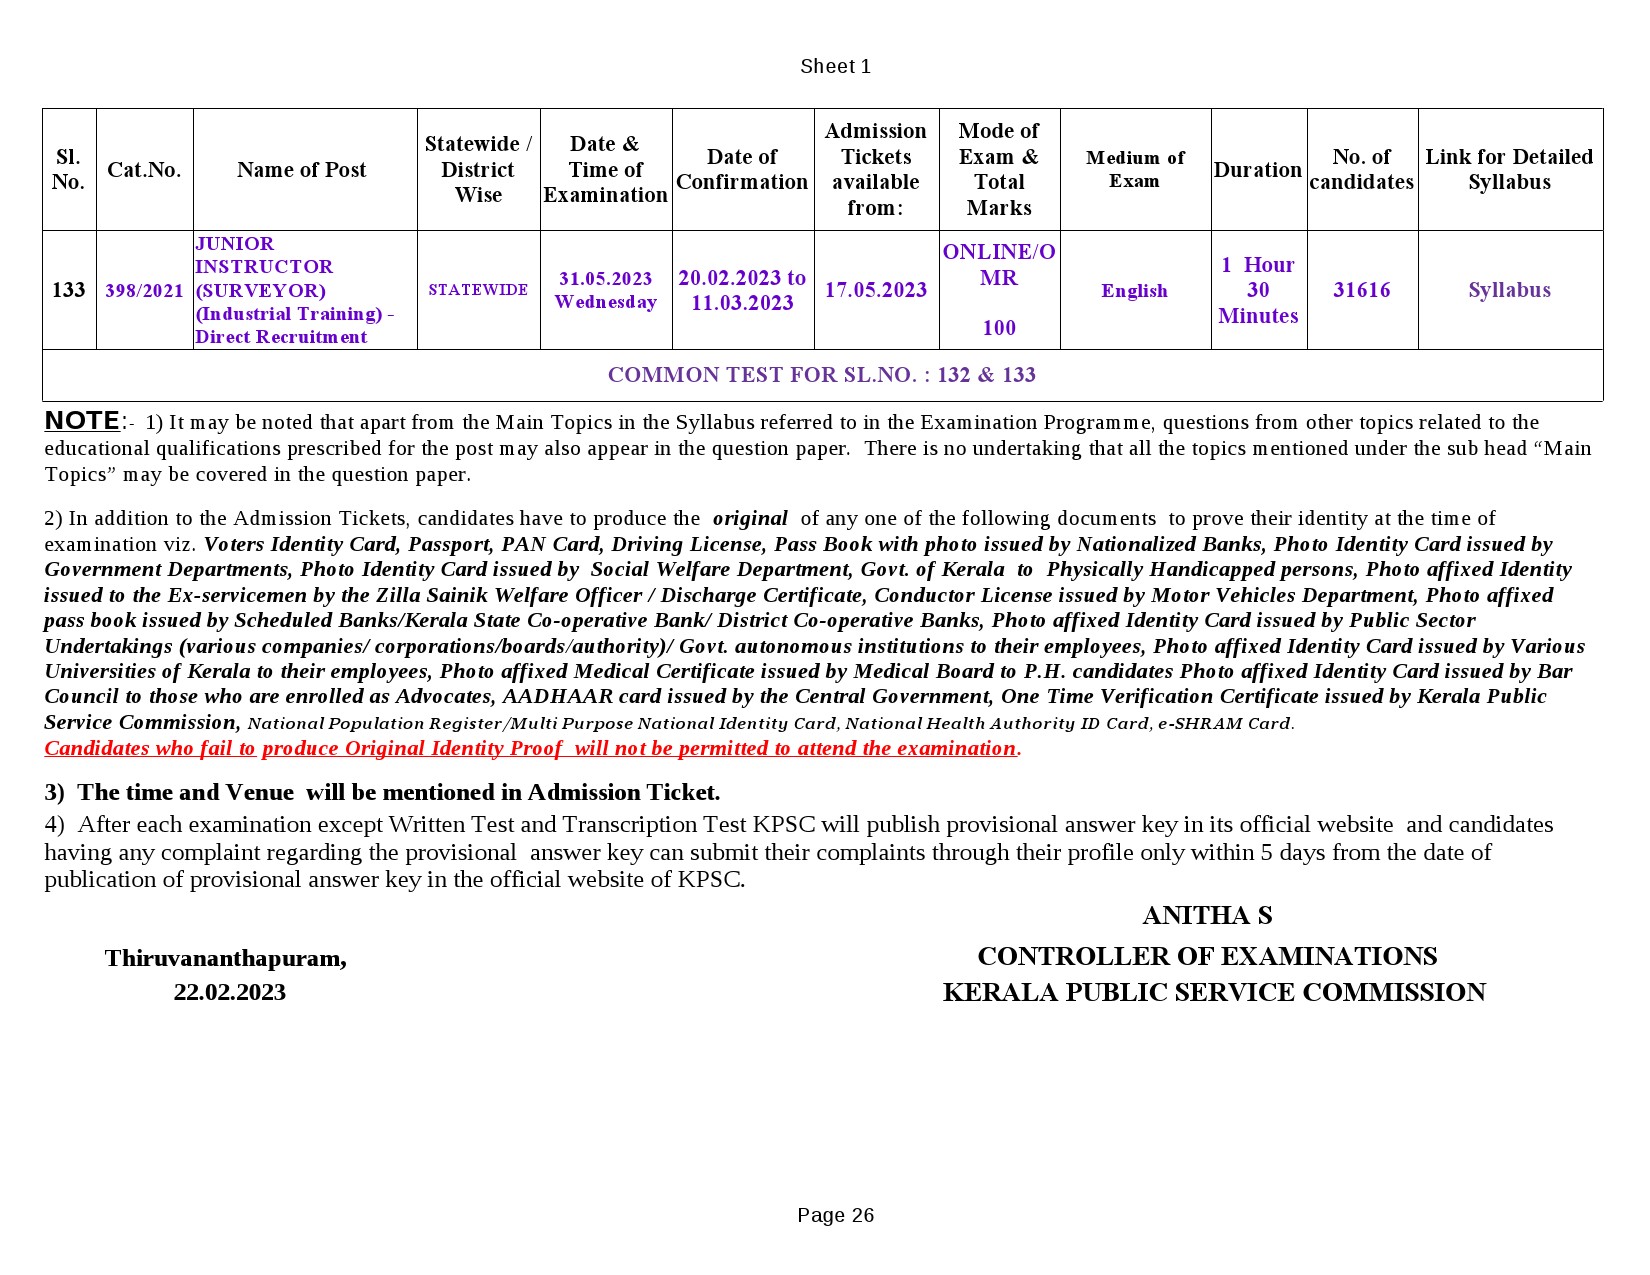 Modified Examination Programme For The Month Of May 2023 - Notification Image 26